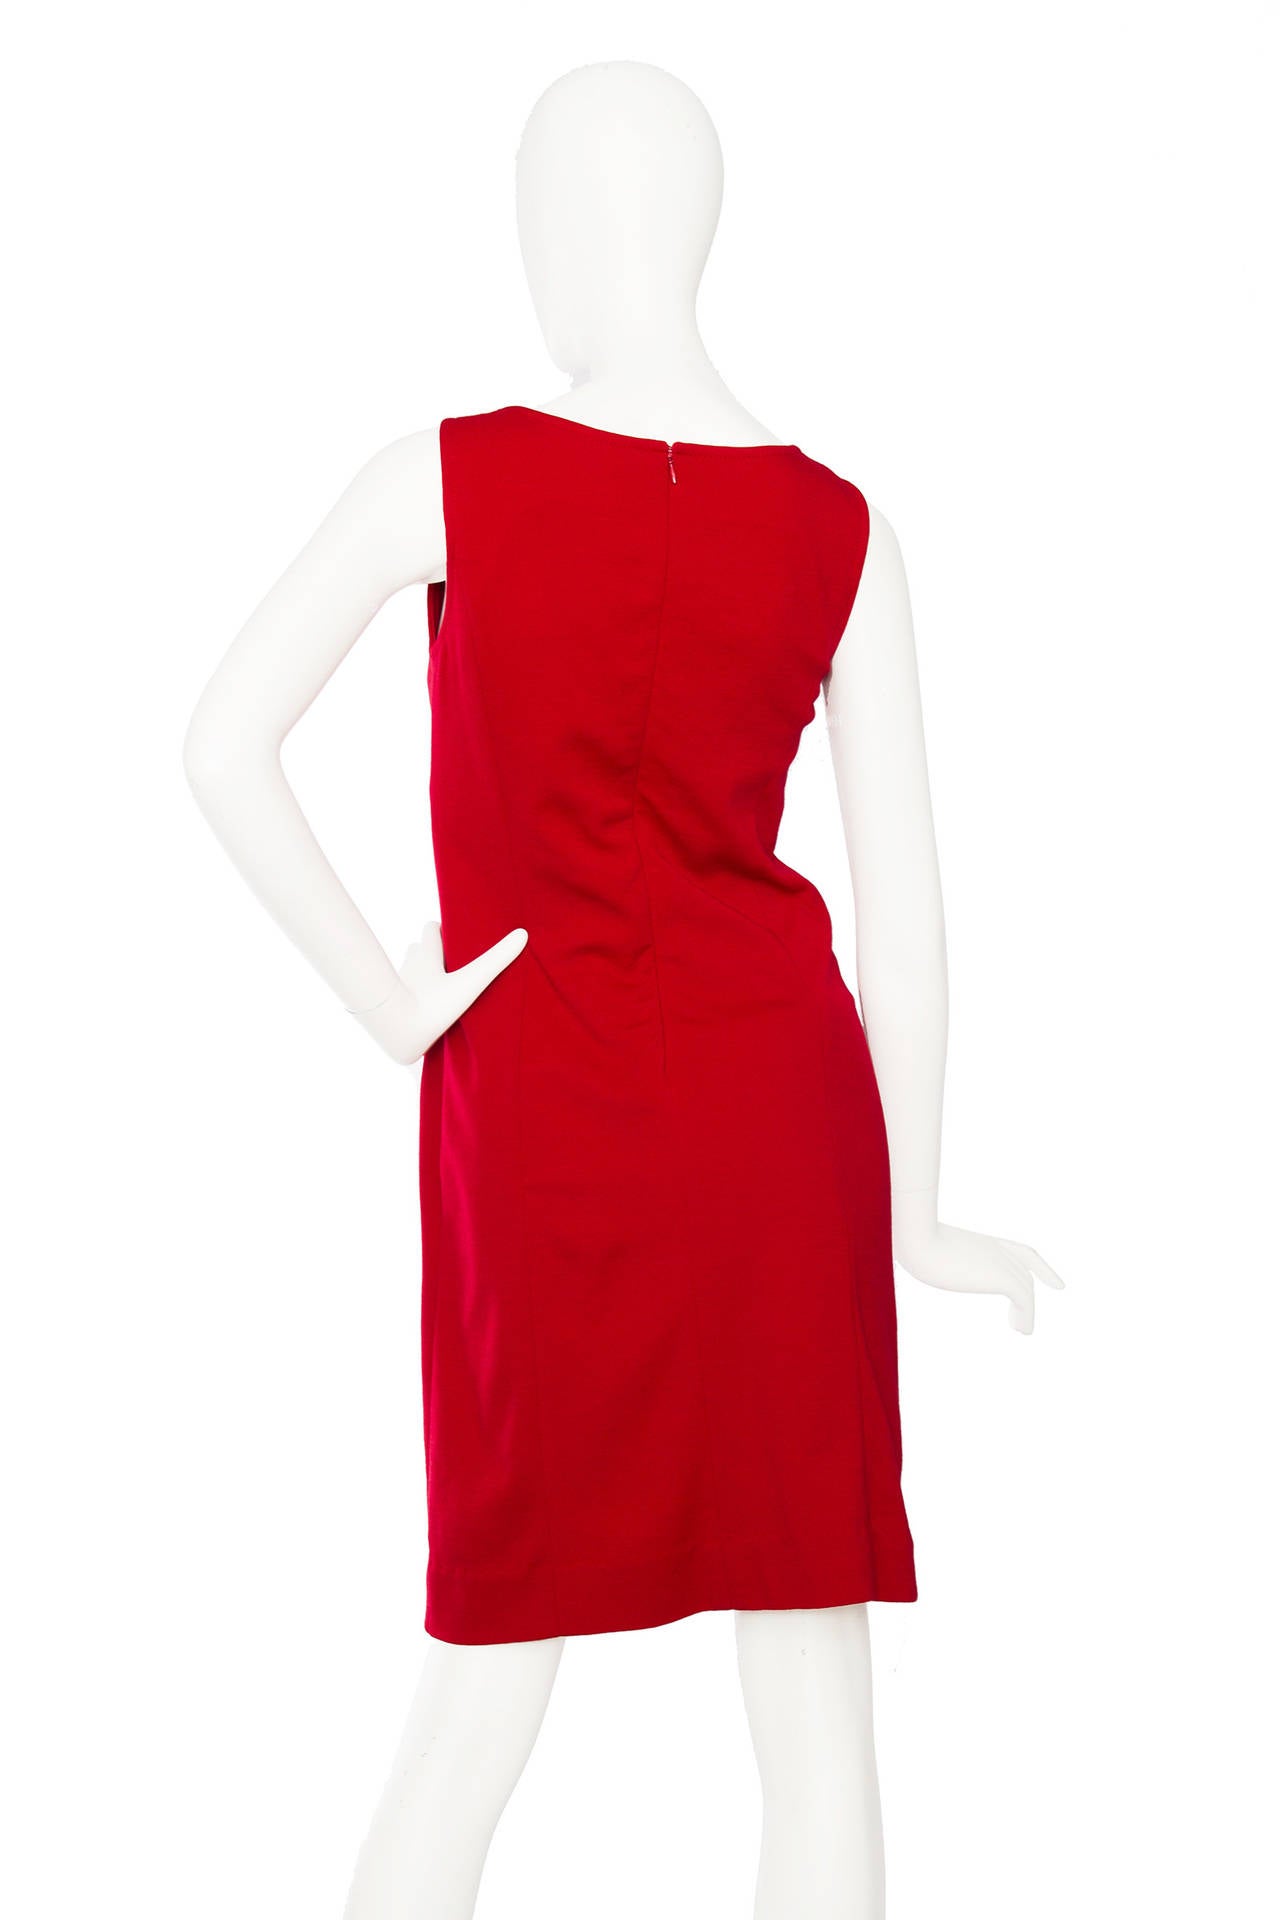 A 1960s Pierre Carding red space age mini dress with a back zipper closure. The dress has a round neckline and black dots down the front in a contrasting fabric and varying in size. 

The size of the dress corresponds to that of a modern size